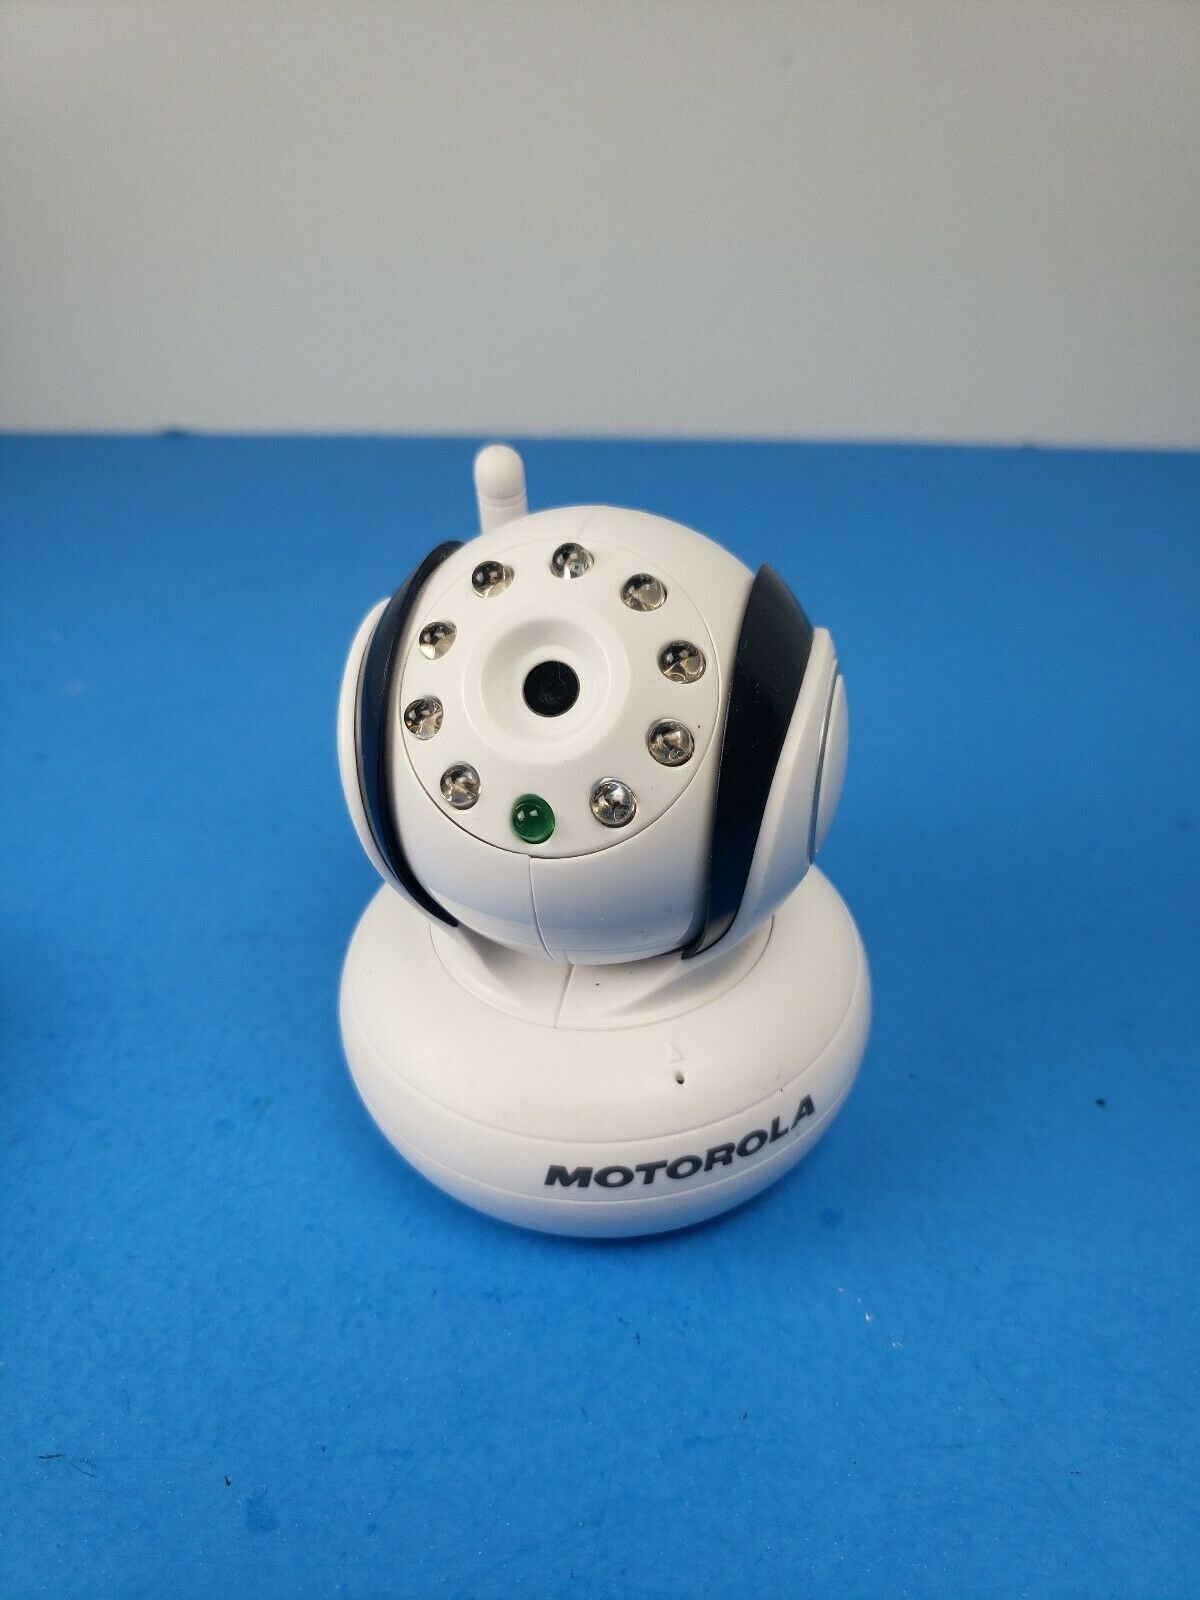 Primary image for Motorola MBP33 Baby Monitor camera Only (MBP33BU), *no Adapter